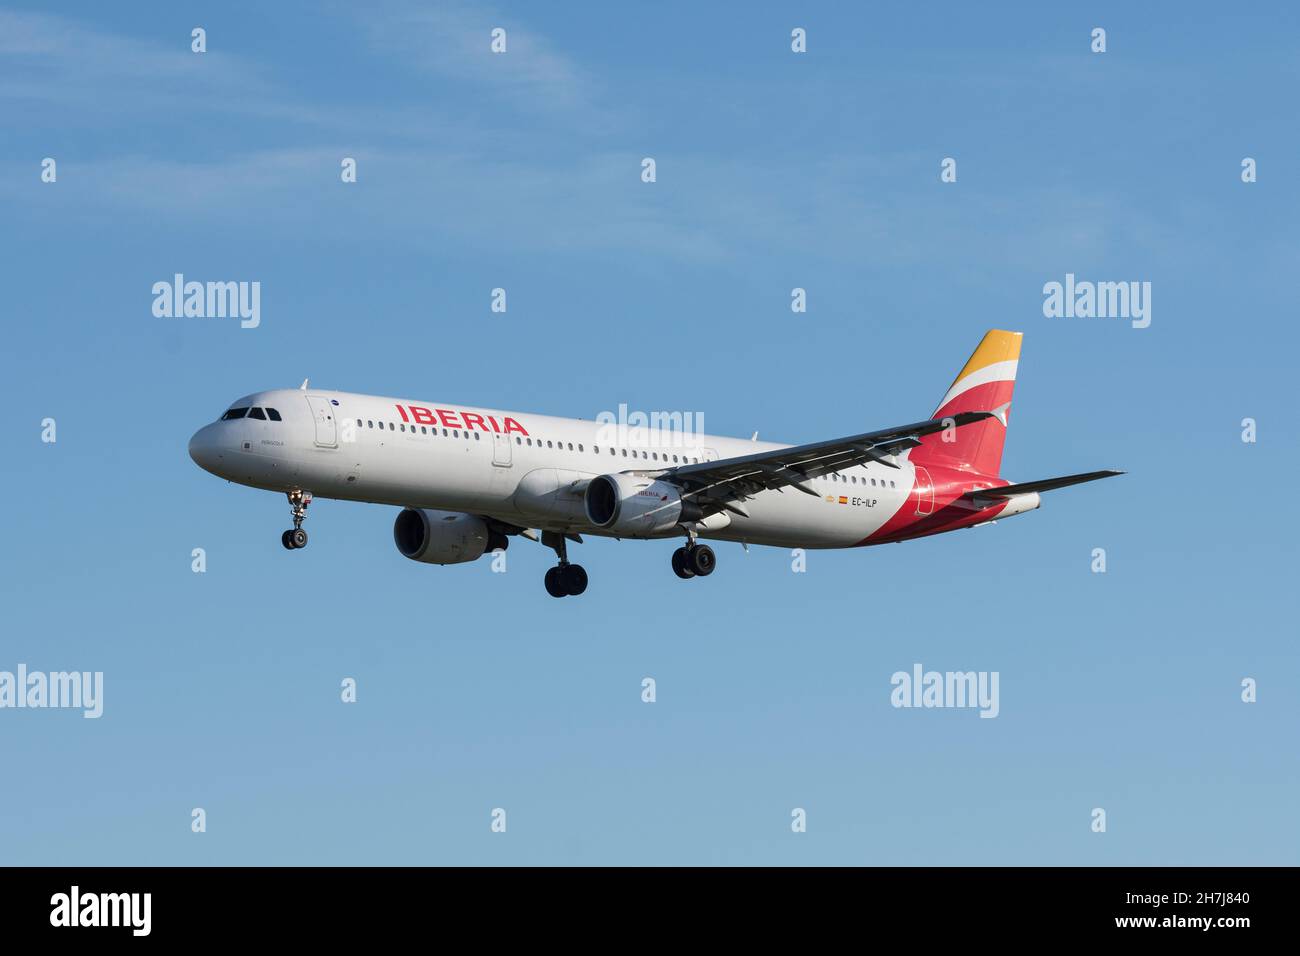 BARCELONA, SPAIN - Oct 25, 2021: Big passenger airline plane in the sky. Airbus A321 of Iberia Stock Photo